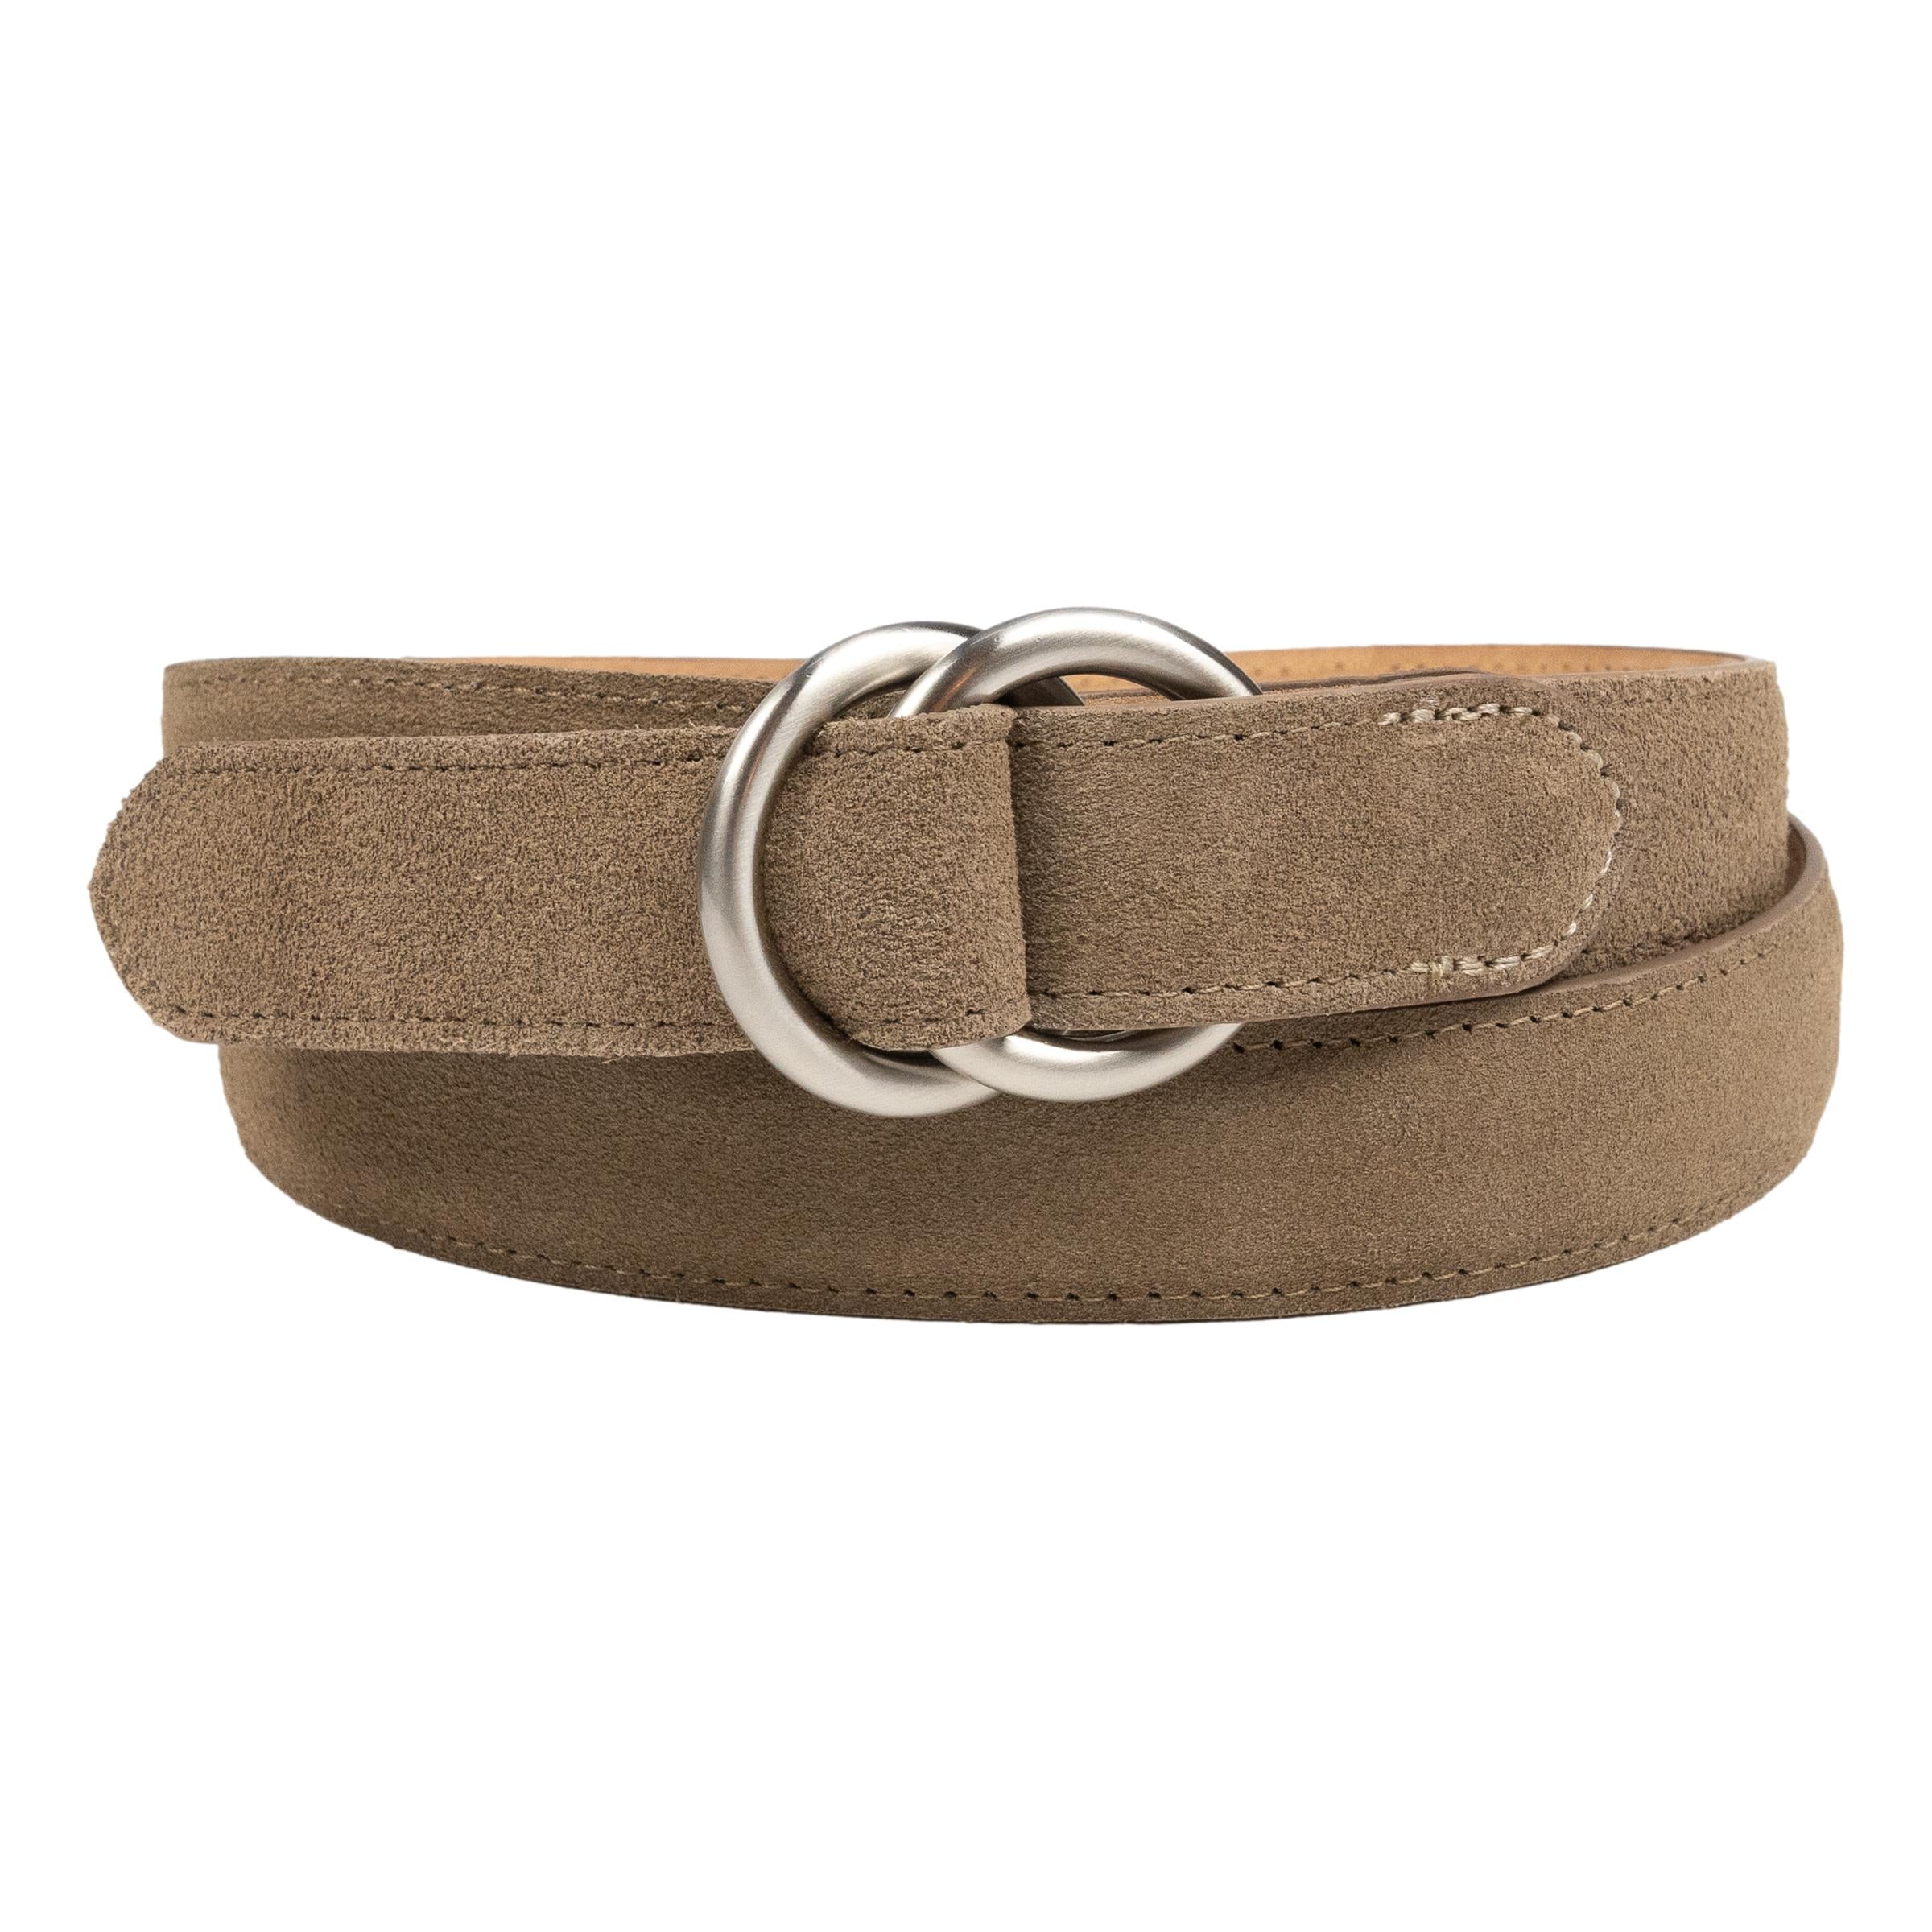 Suede Calfskin Belt with O-Ring Buckle